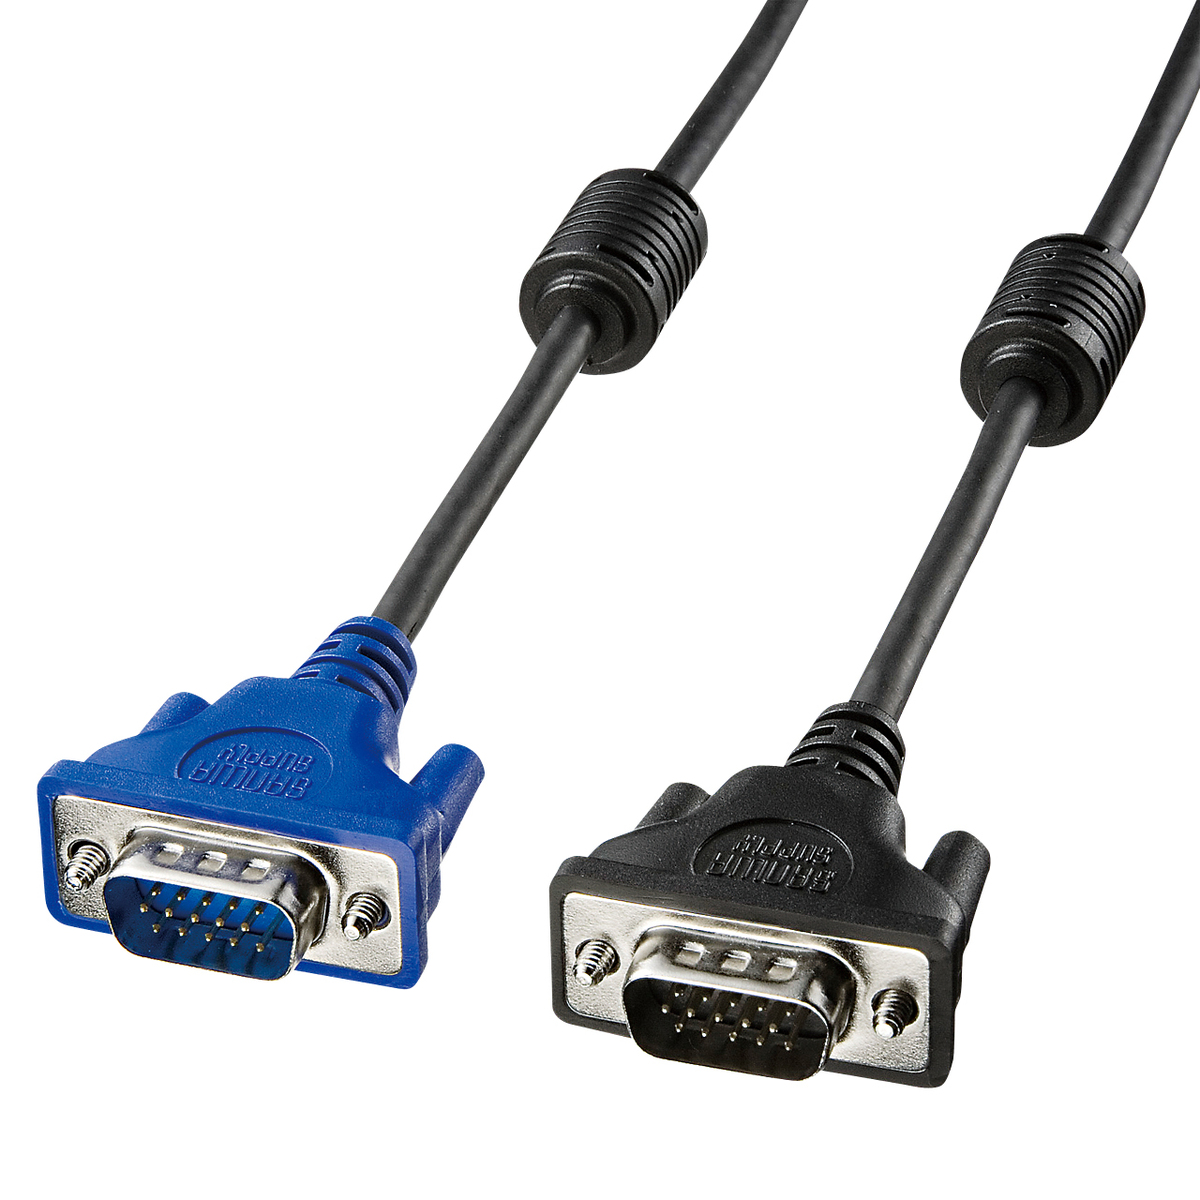 Display Cables - Ultra-Thin, Compound Coaxial